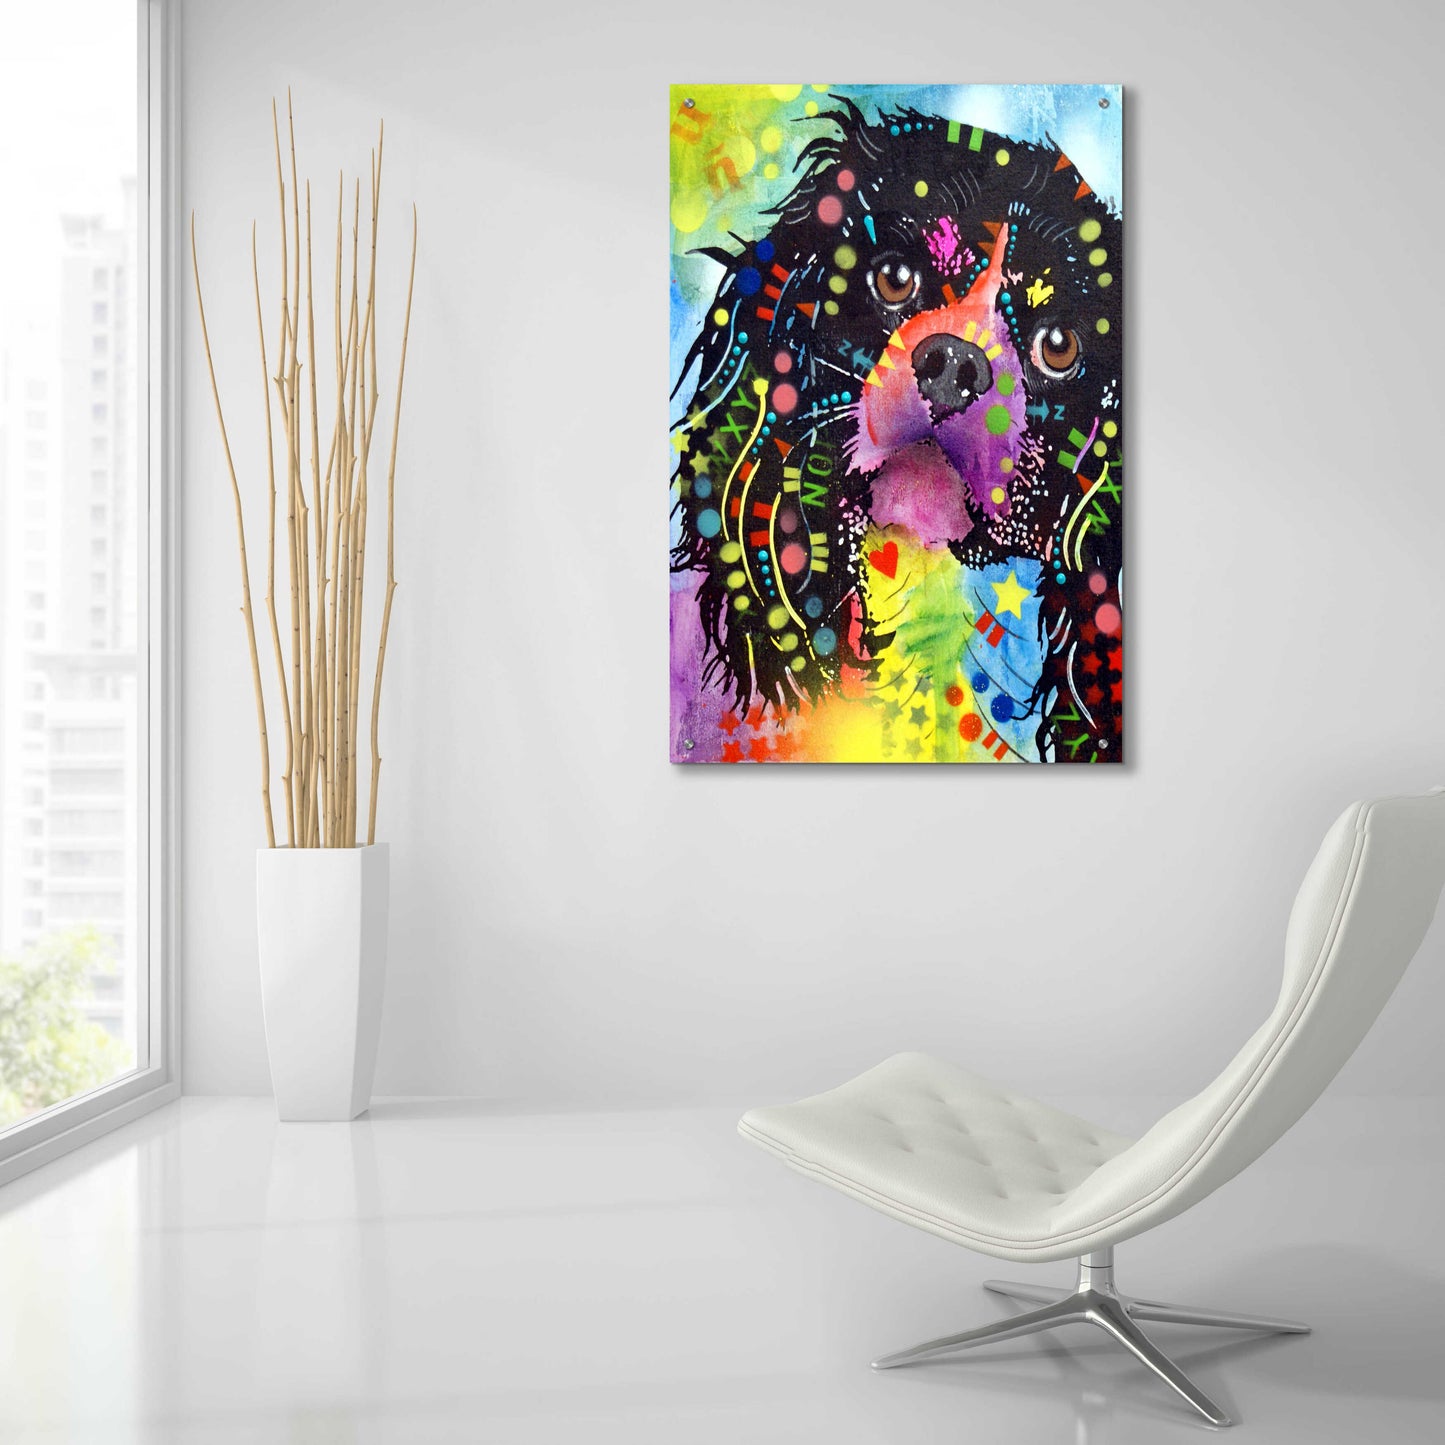 Epic Art 'King Charles 2' by Dean Russo, Acrylic Glass Wall Art,24x36